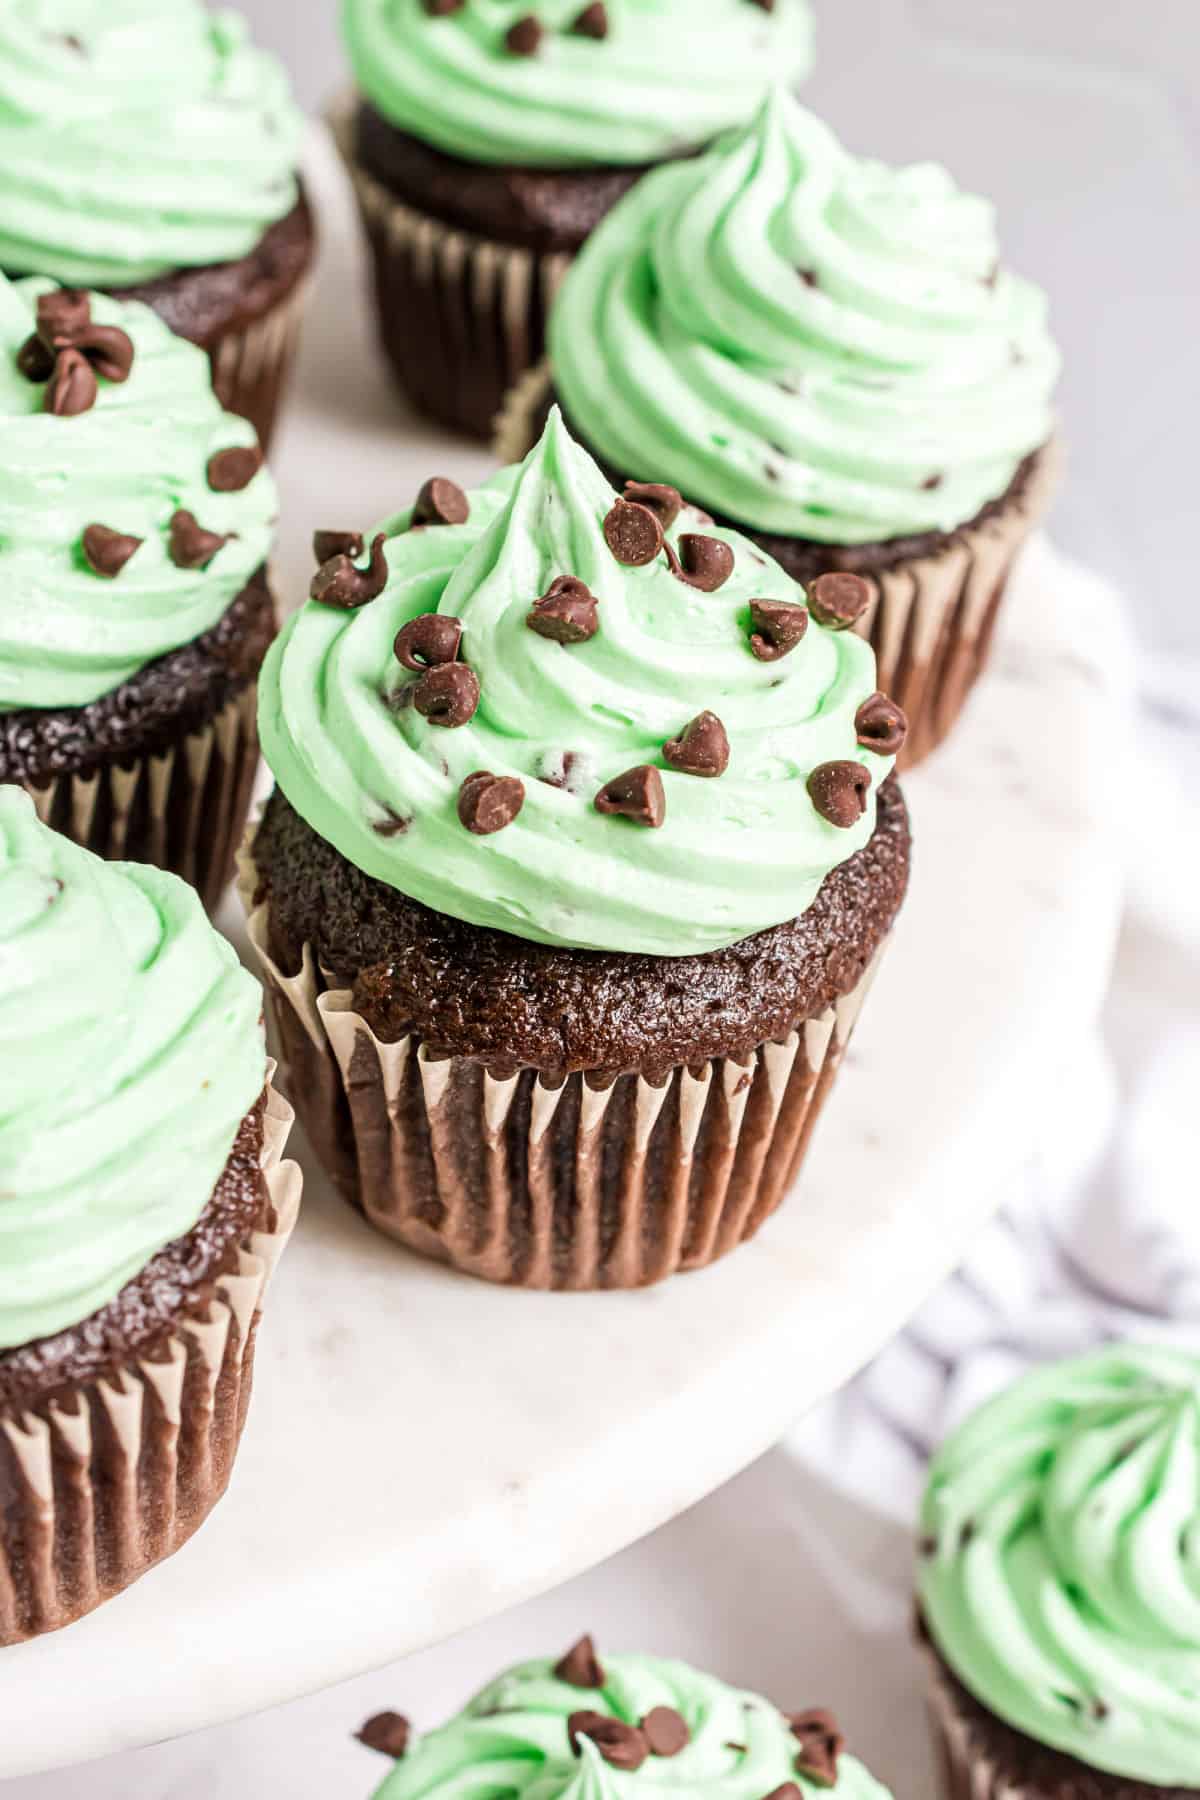 White cake platter with mint chocolate chip frosted chocolate cupcakes.